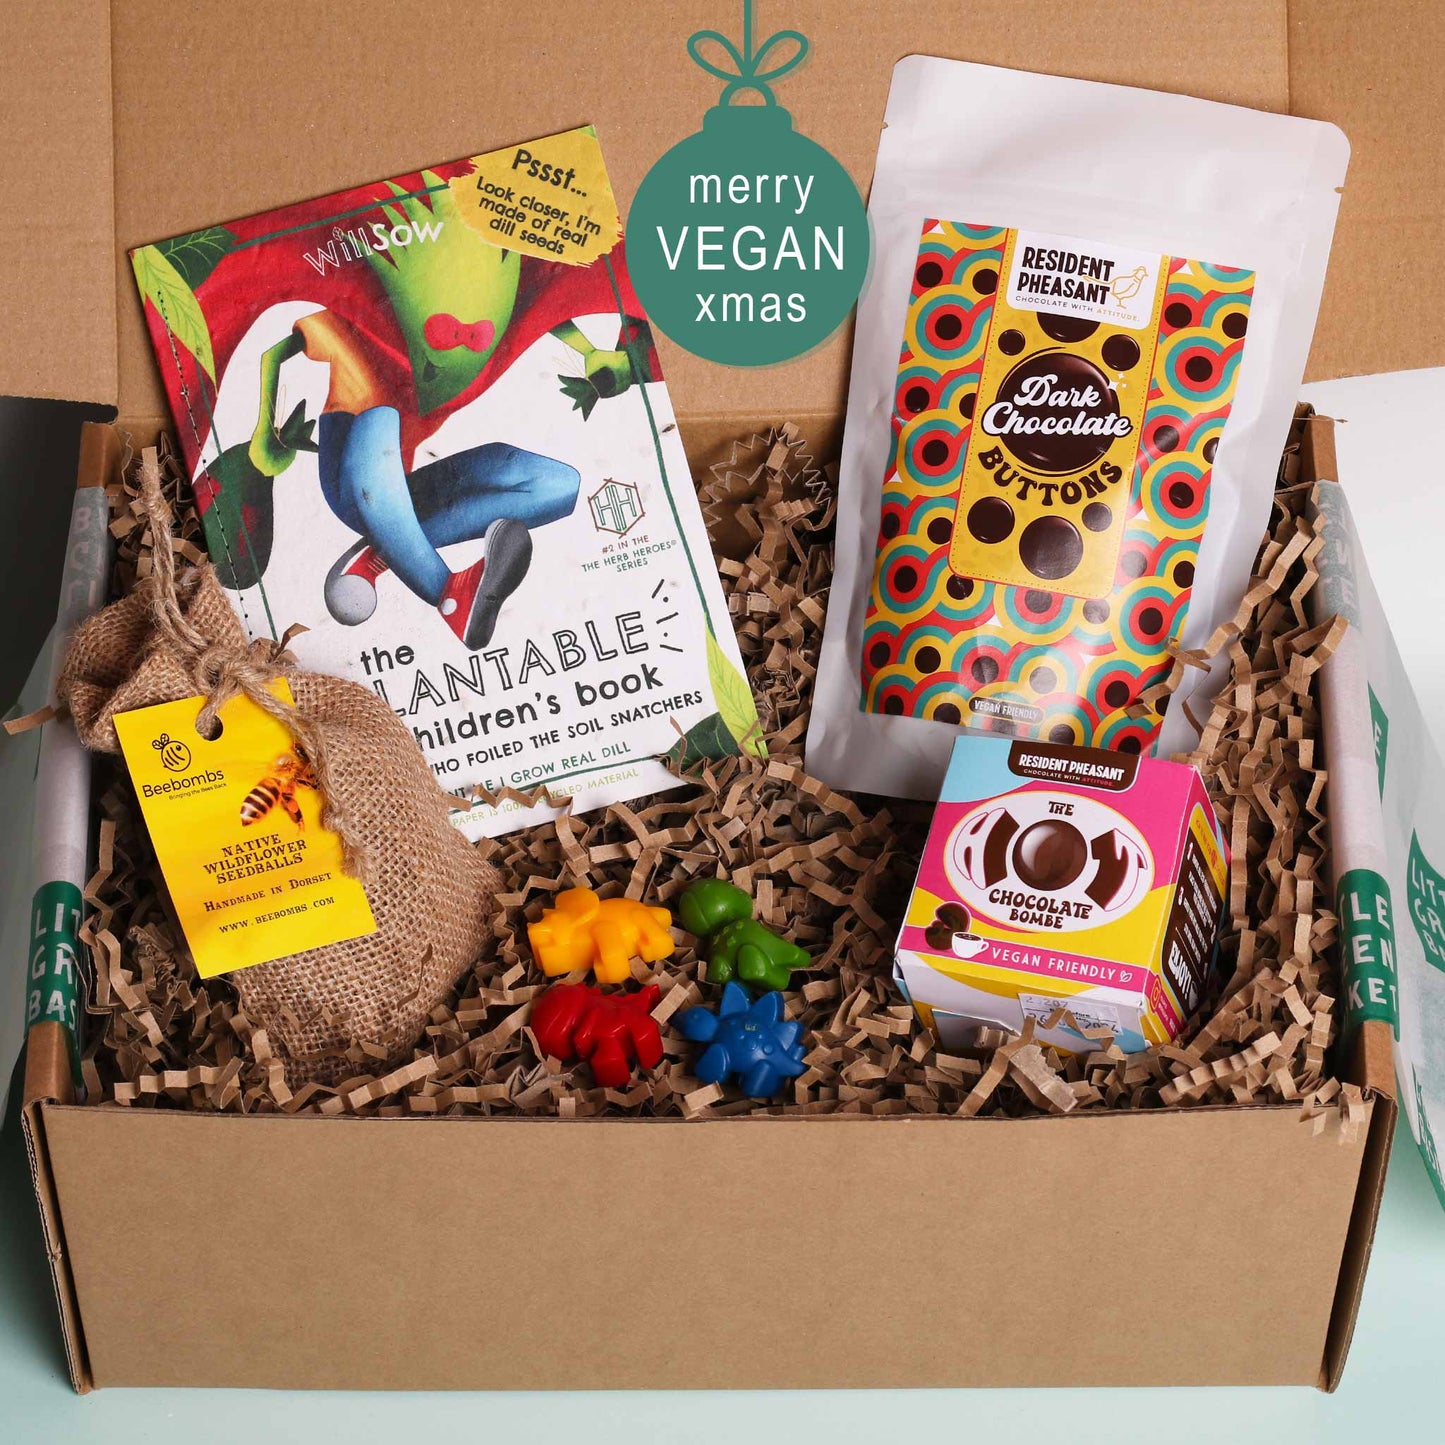 Kids Vegan Gift Box with cookies, crayons, Hellion Toy , Beebomb seeds and Willsow book